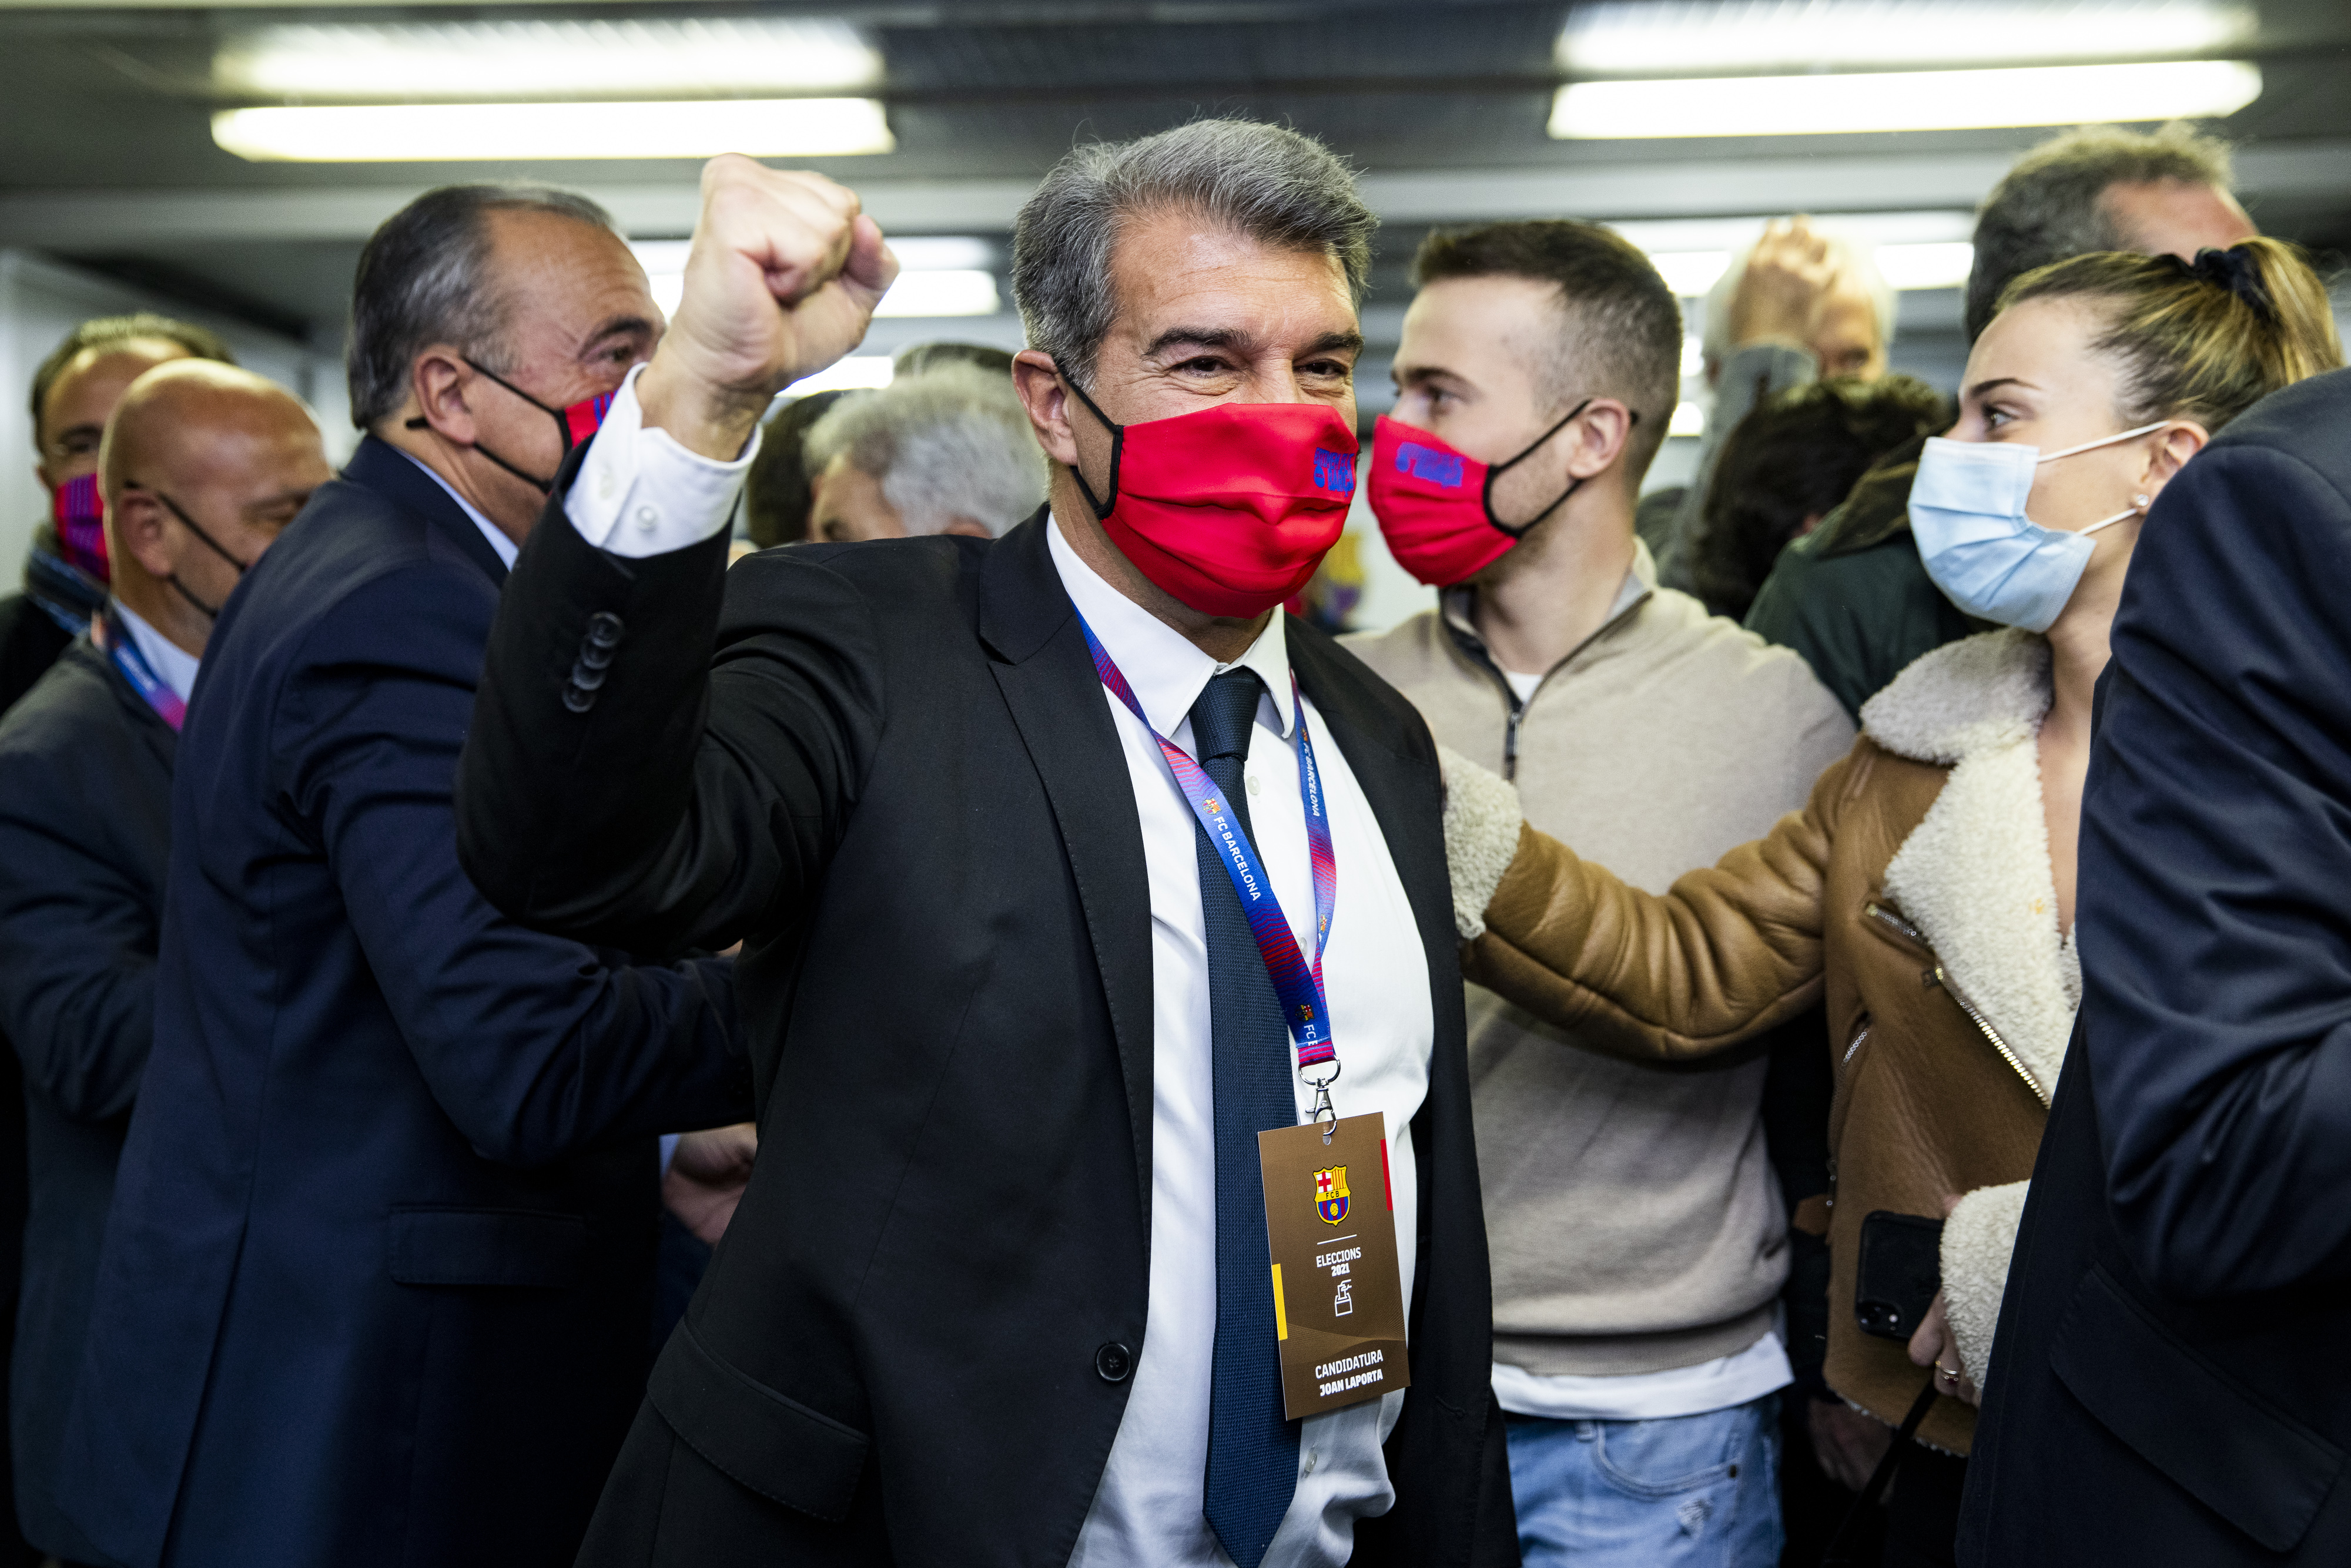 Joan Laporta elected Barcelona president for second time with more than 50% of vote